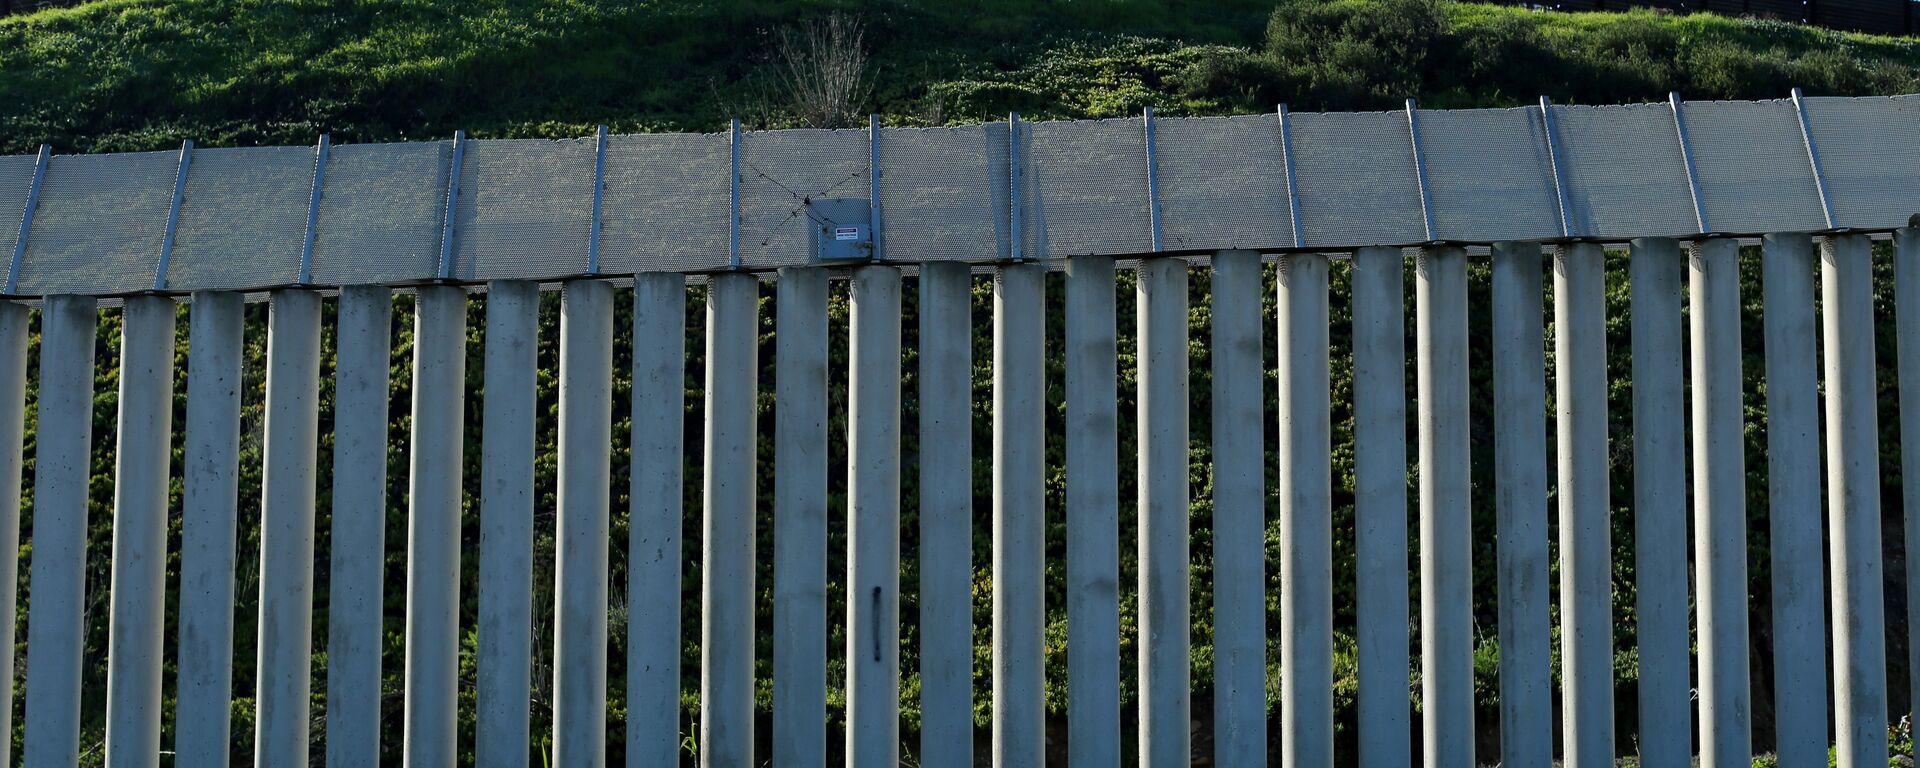 The border wall separating the United States and Mexico is pictured in San Ysidro, California. - Sputnik Mundo, 1920, 06.04.2021